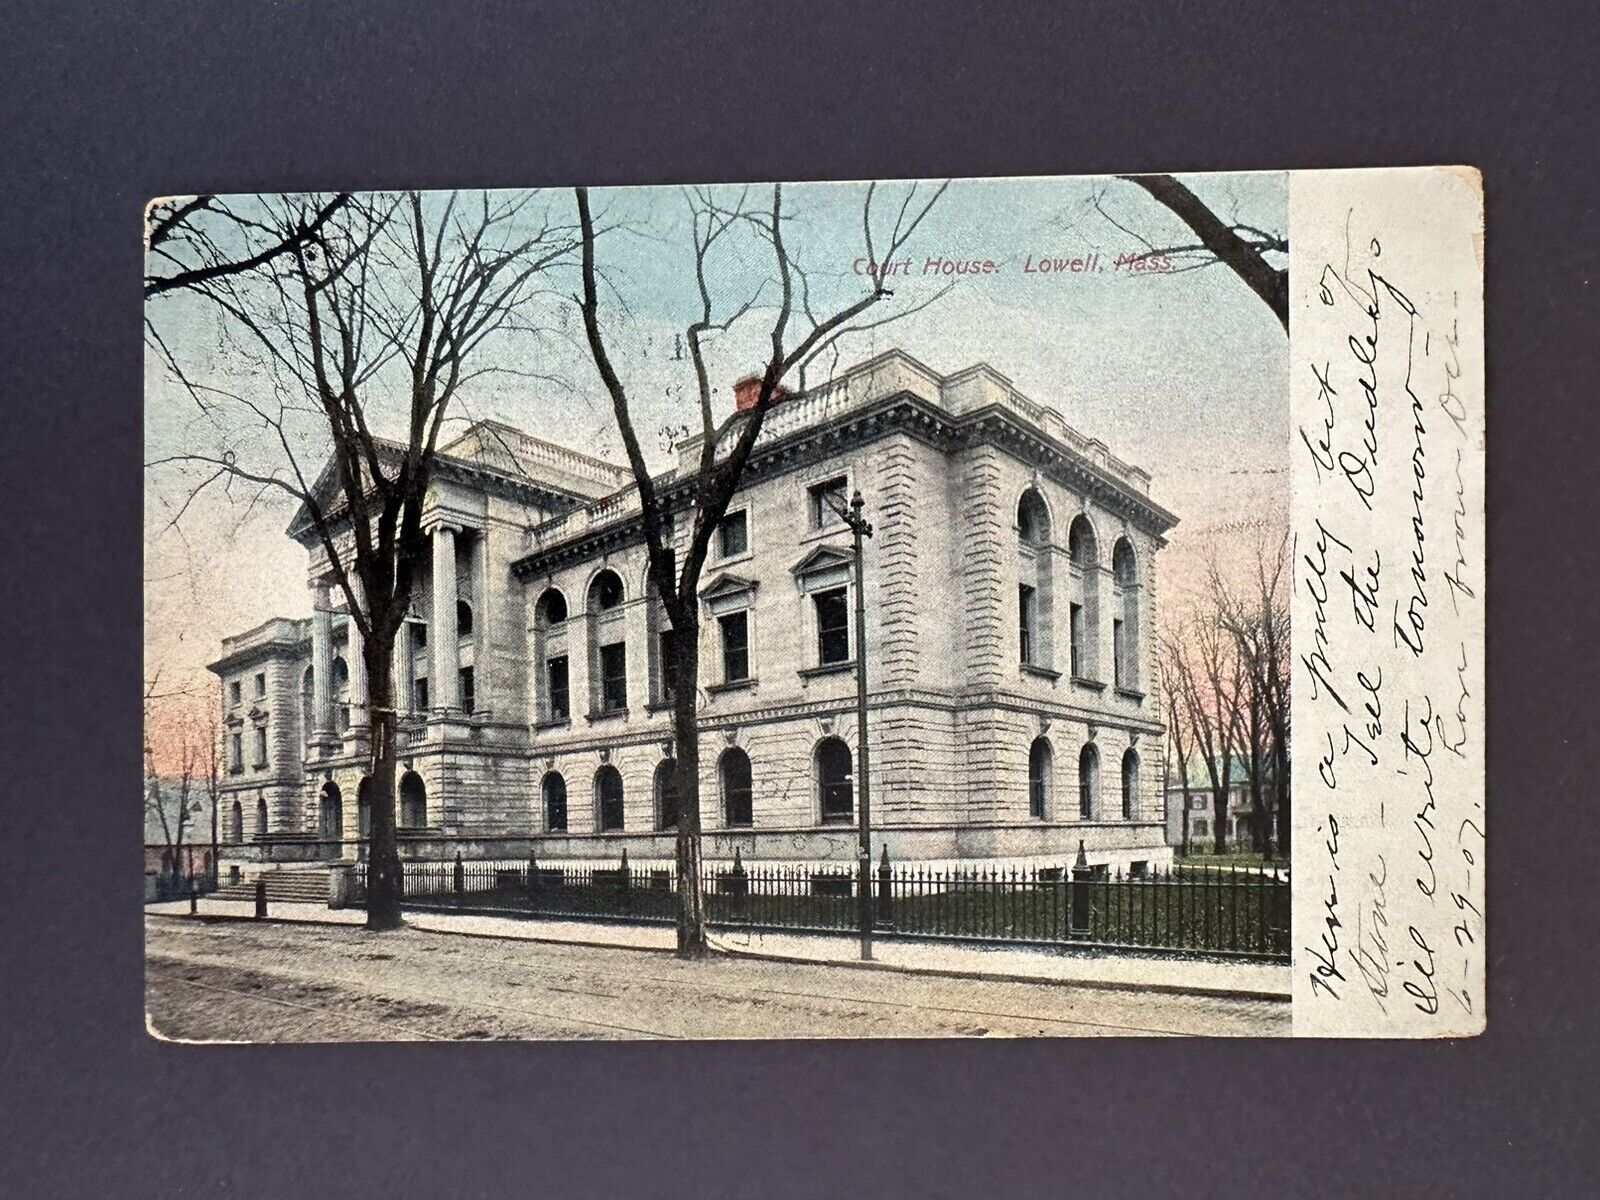 Middlesex County Court House Lowell Massachusetts c1907 Vintage Postcard D96